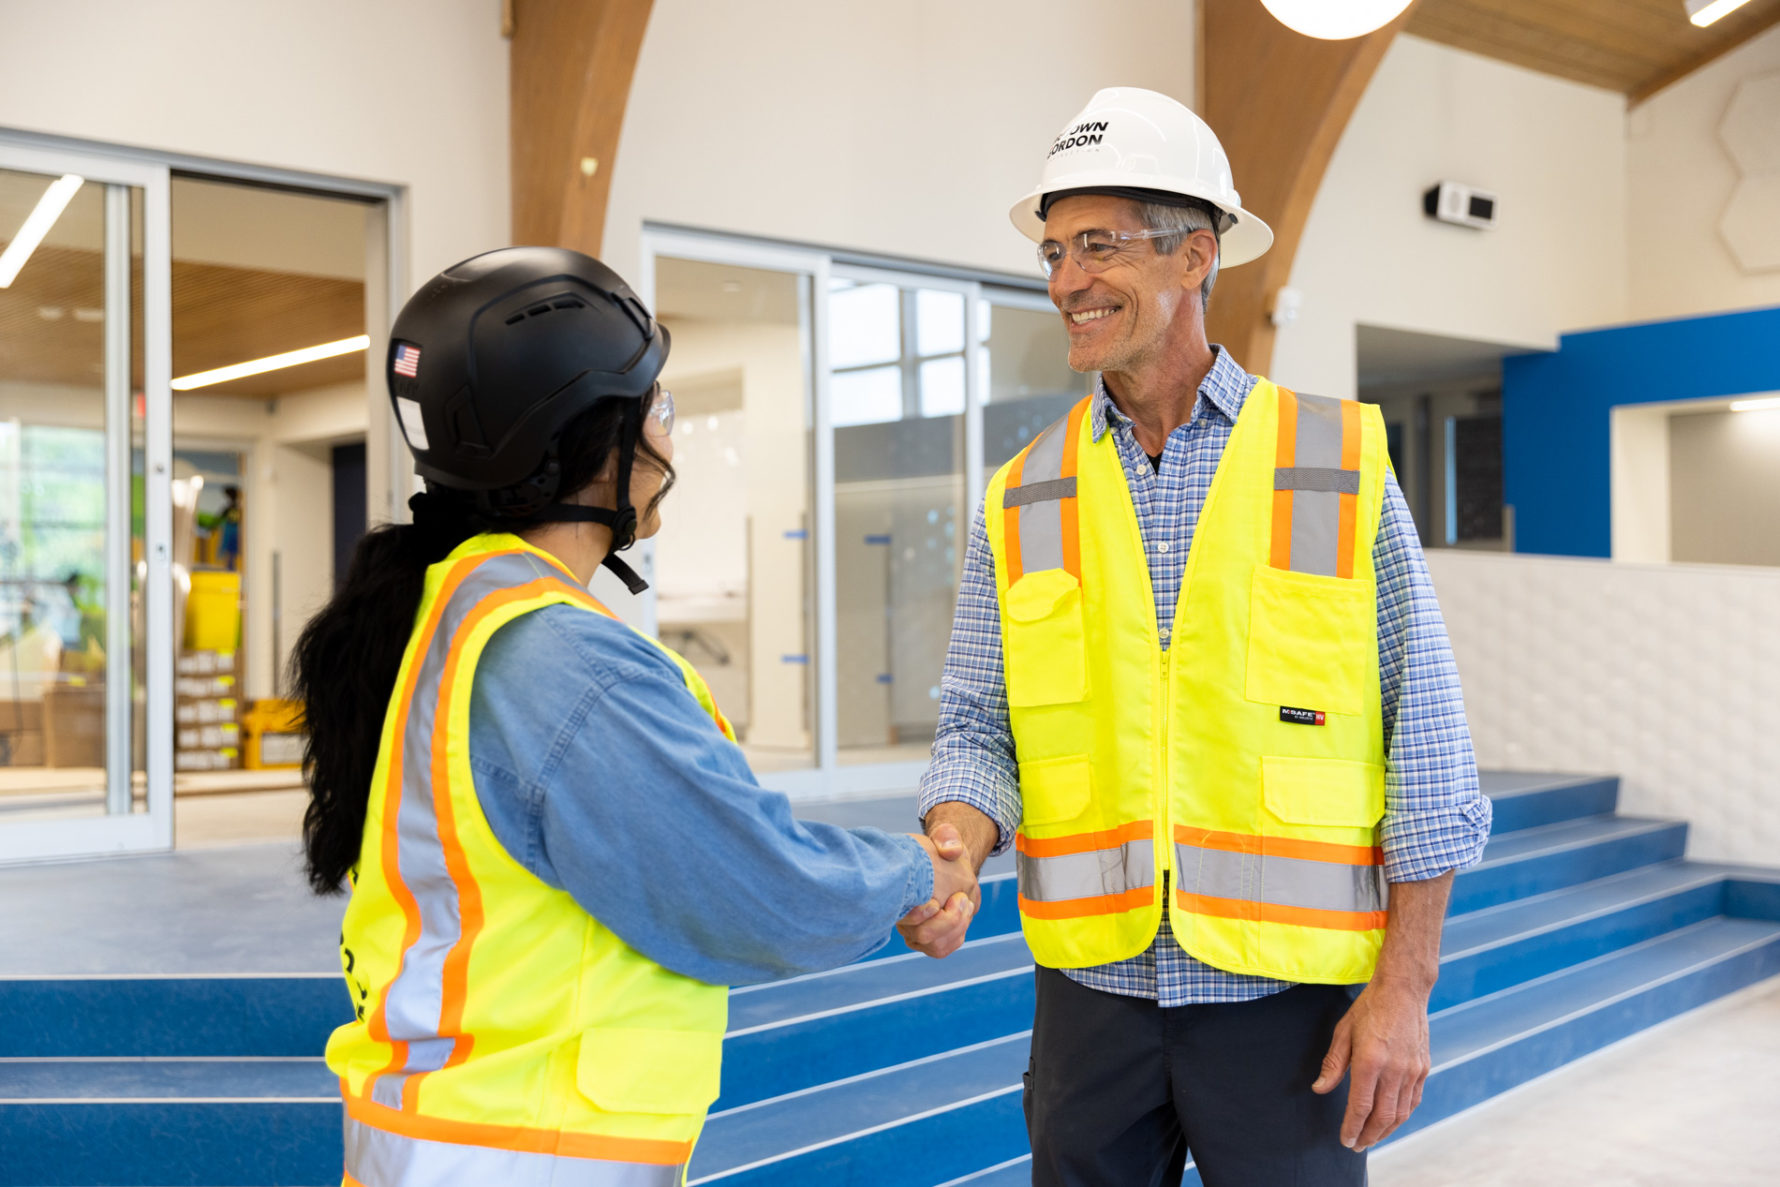 A McCownGordon Construction associate shaking hands with an owner while touring an active job site